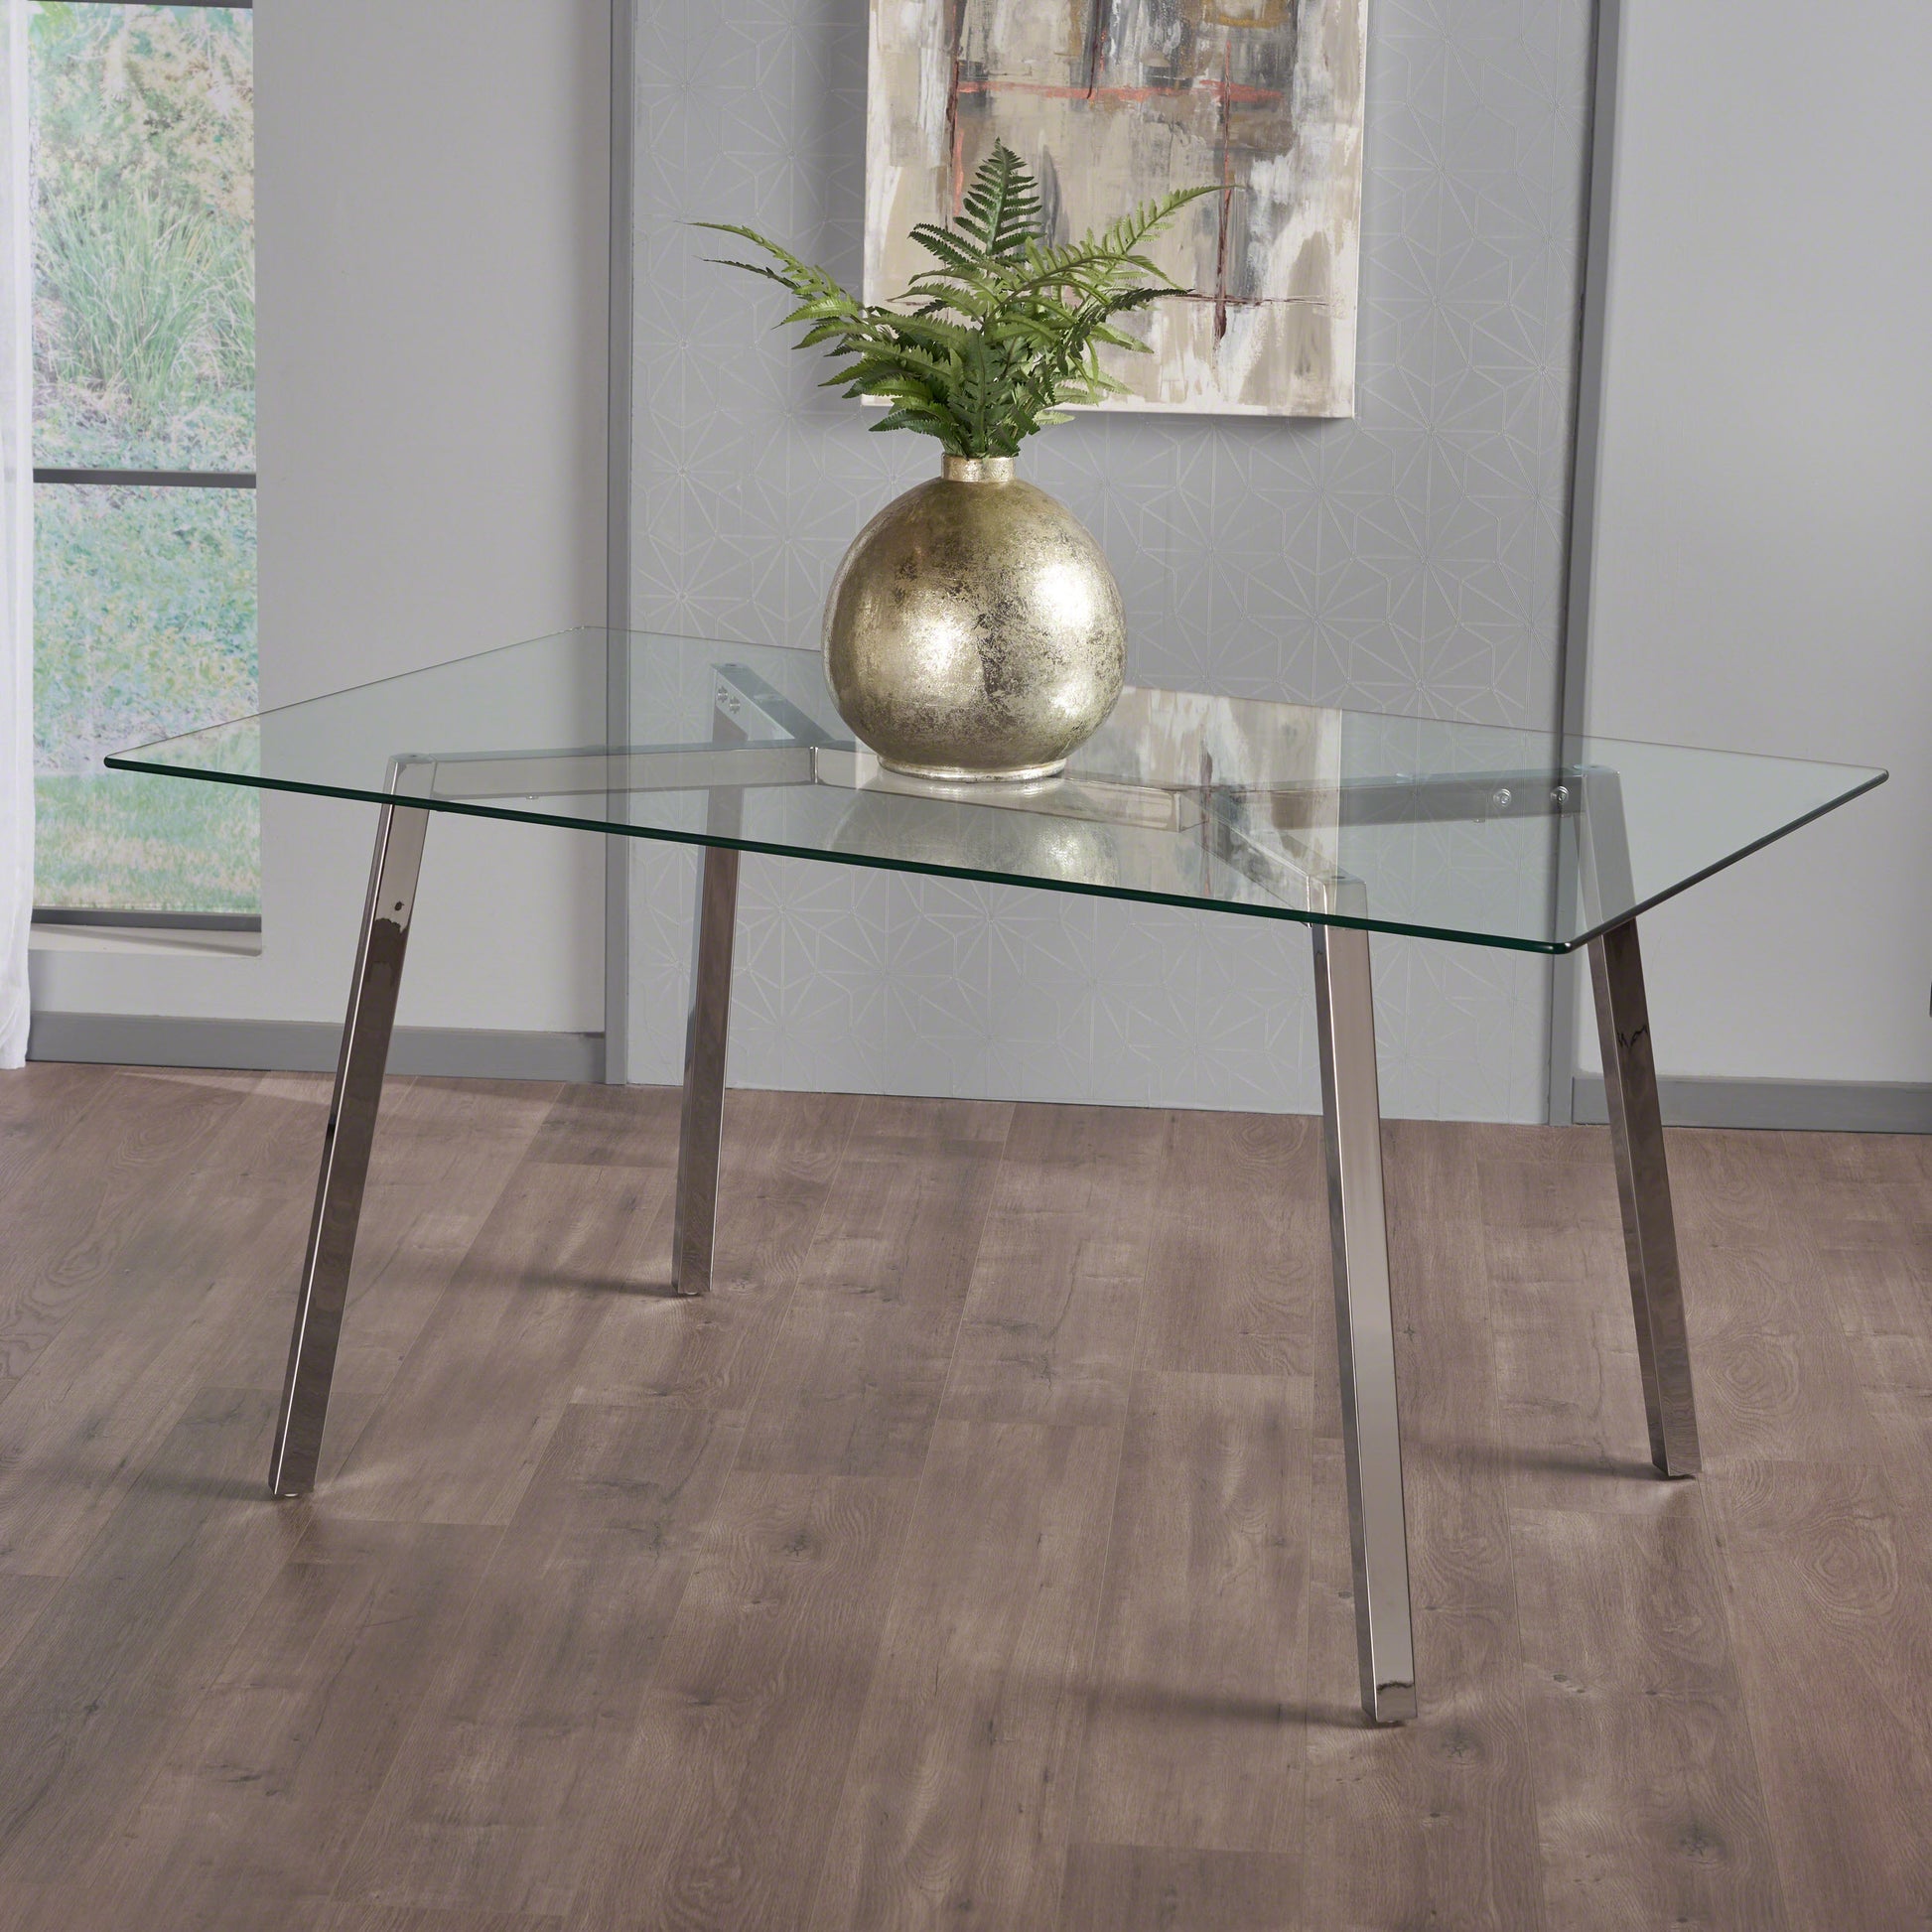 How to clean a glass dining table – streak free? - Glassdomain